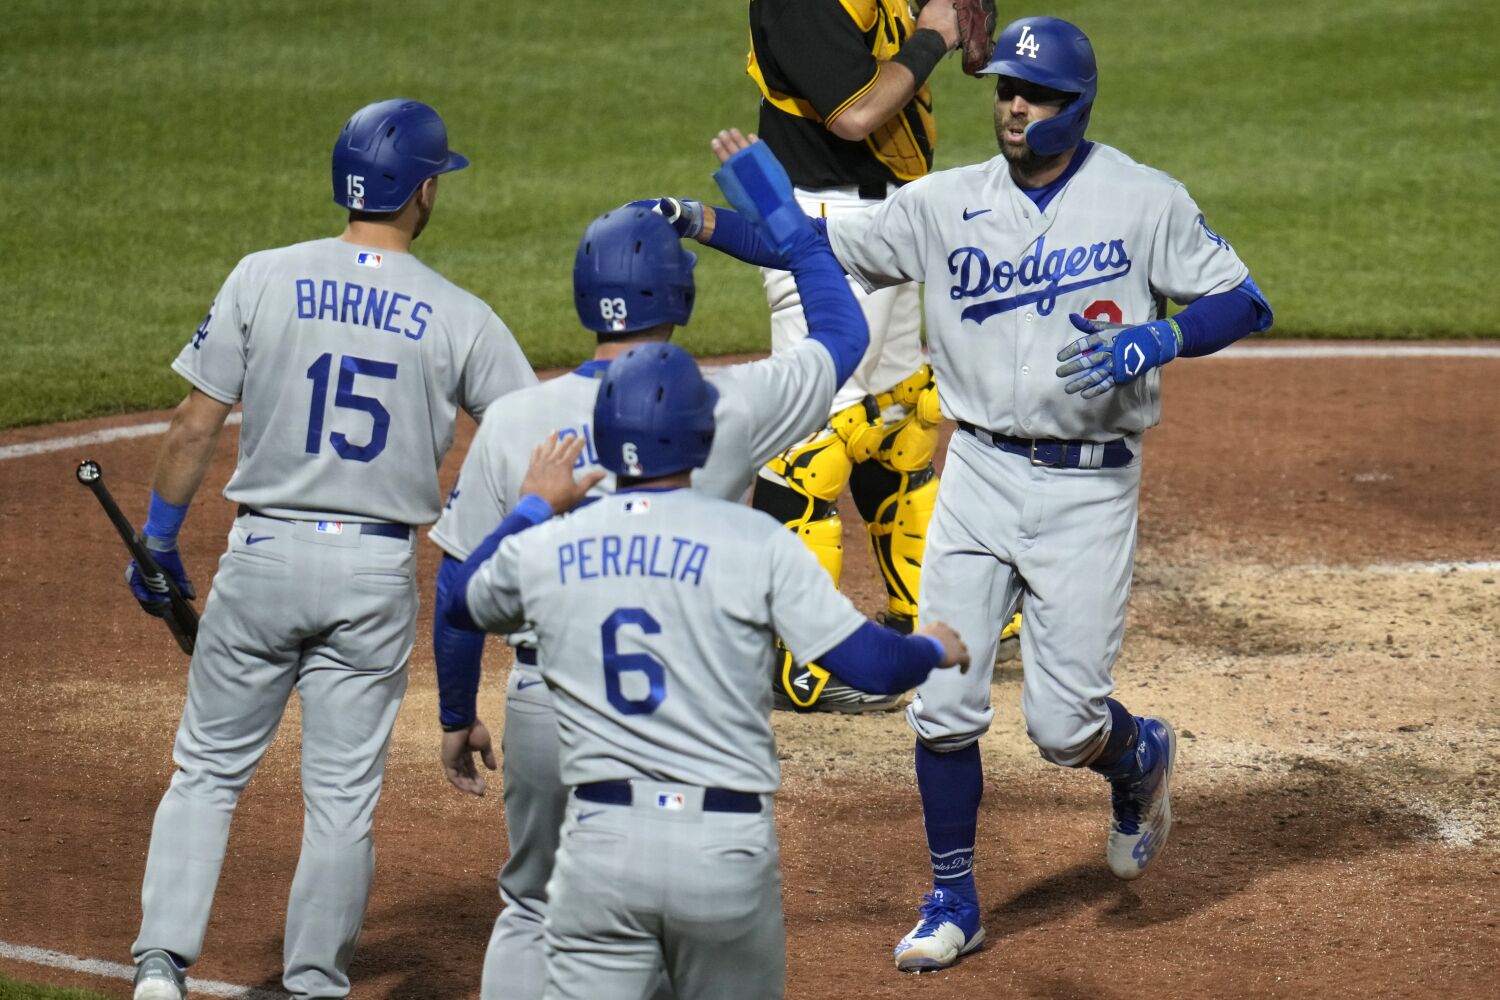 Chris Taylor's homer helps Dodgers rally from five runs down to stop Pirates' streak